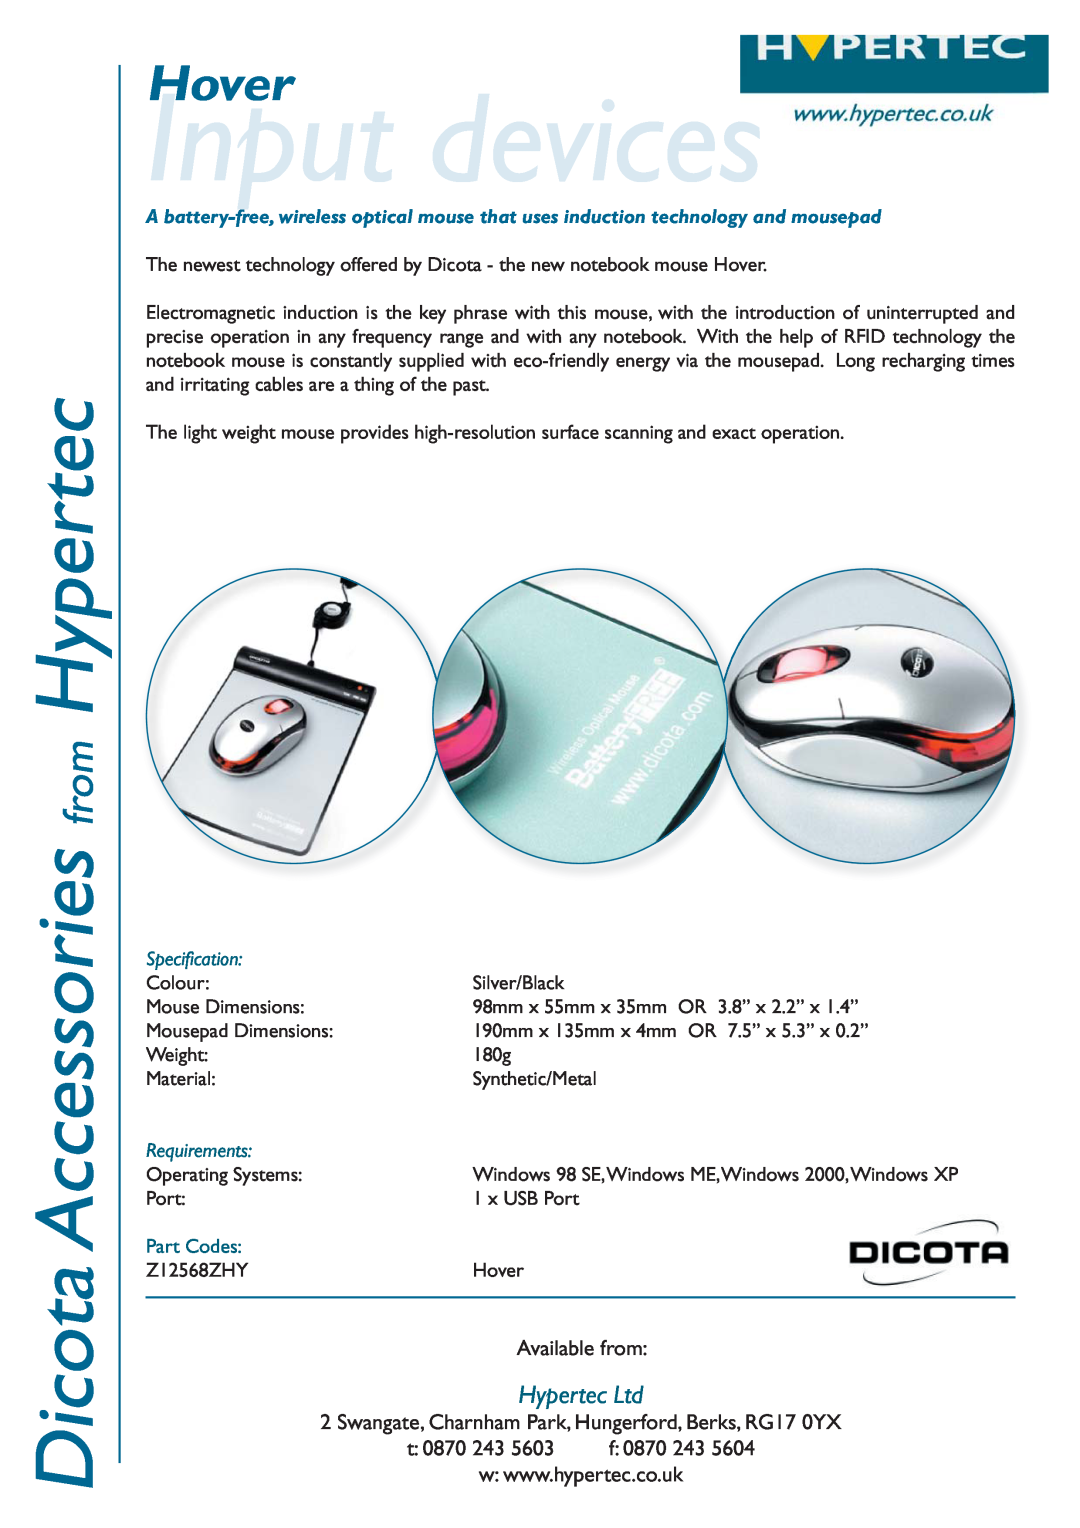 Hypertec Z12568ZHY dimensions Input devices, Dicota Accessories from Hypertec, Hover, Available from, t 0870 243 